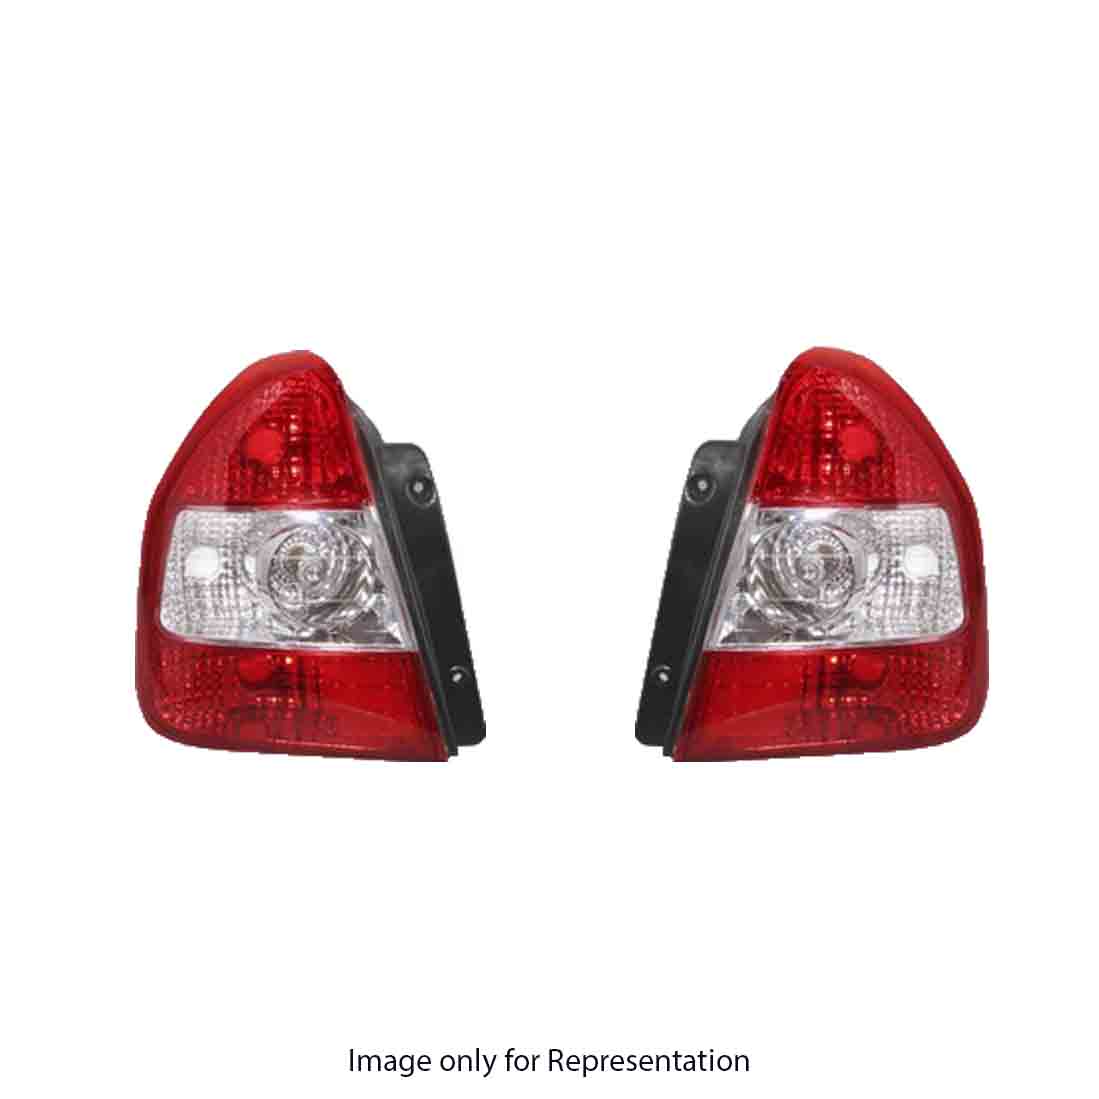 Chevrolet, Opel- Indicator, Tail Light, LAMP ASM RR BODY STRUCTURE STOP J42564719